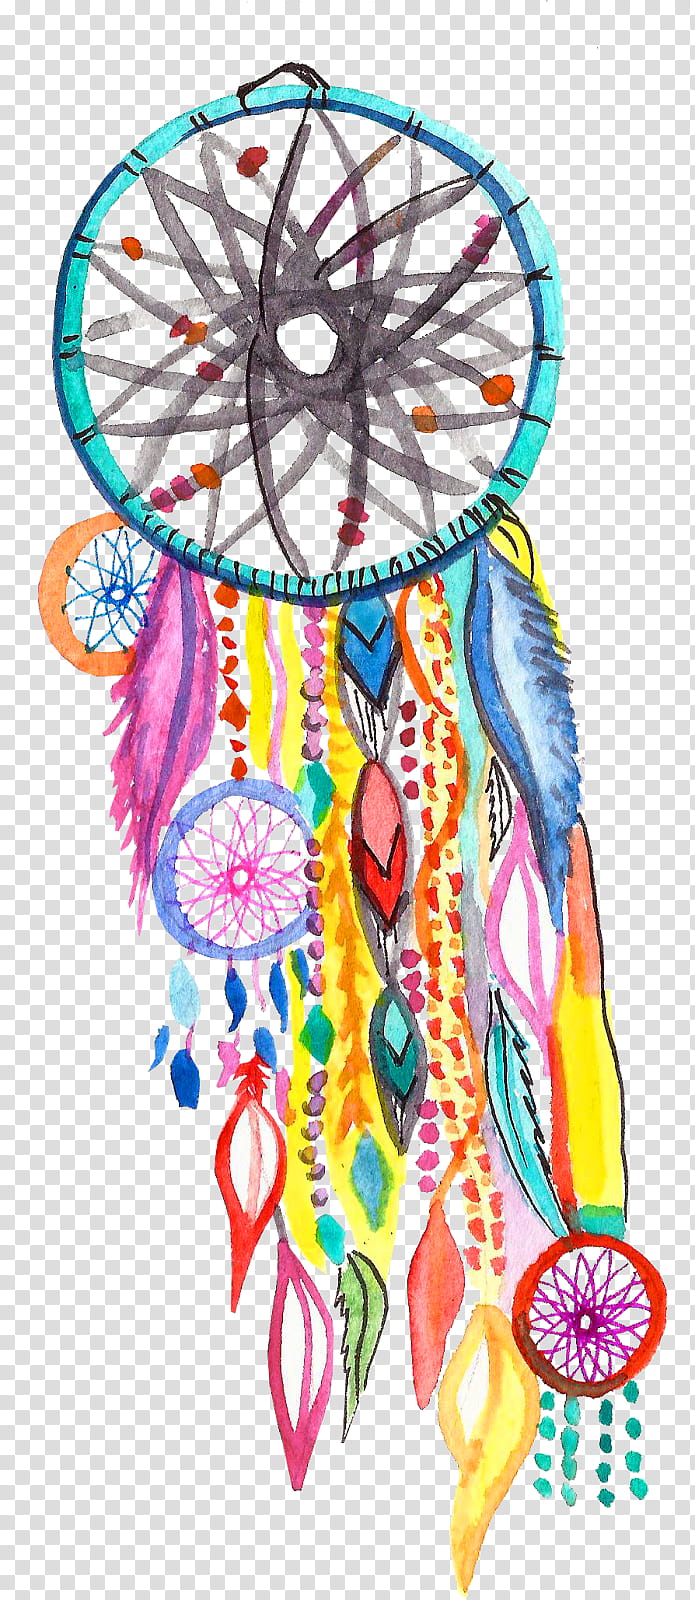 Dream Catcher, Dreamcatcher, Painting, Watercolor Painting, Drawing, Printmaking transparent background PNG clipart